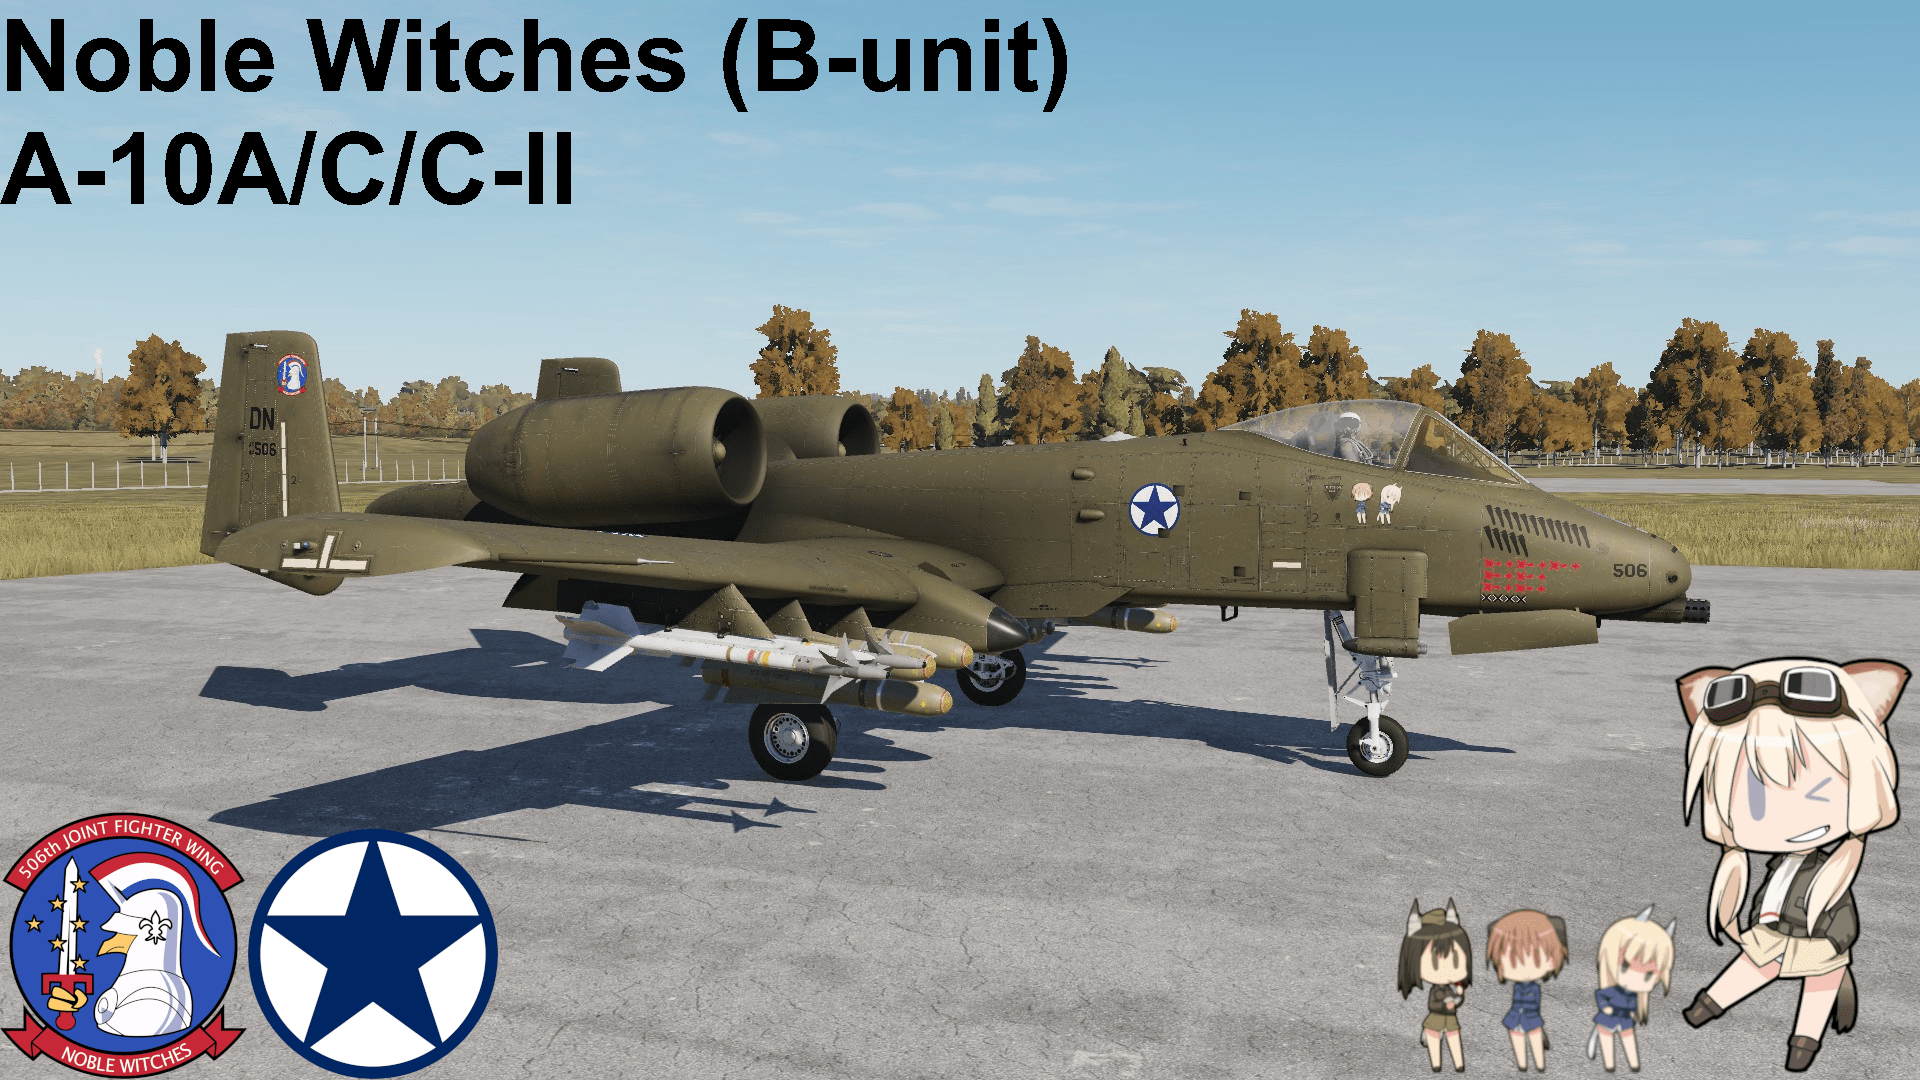 (OLD AND GARBAGE) World Witches - 506th JFW "Noble Witches (B-unit)" A-10C